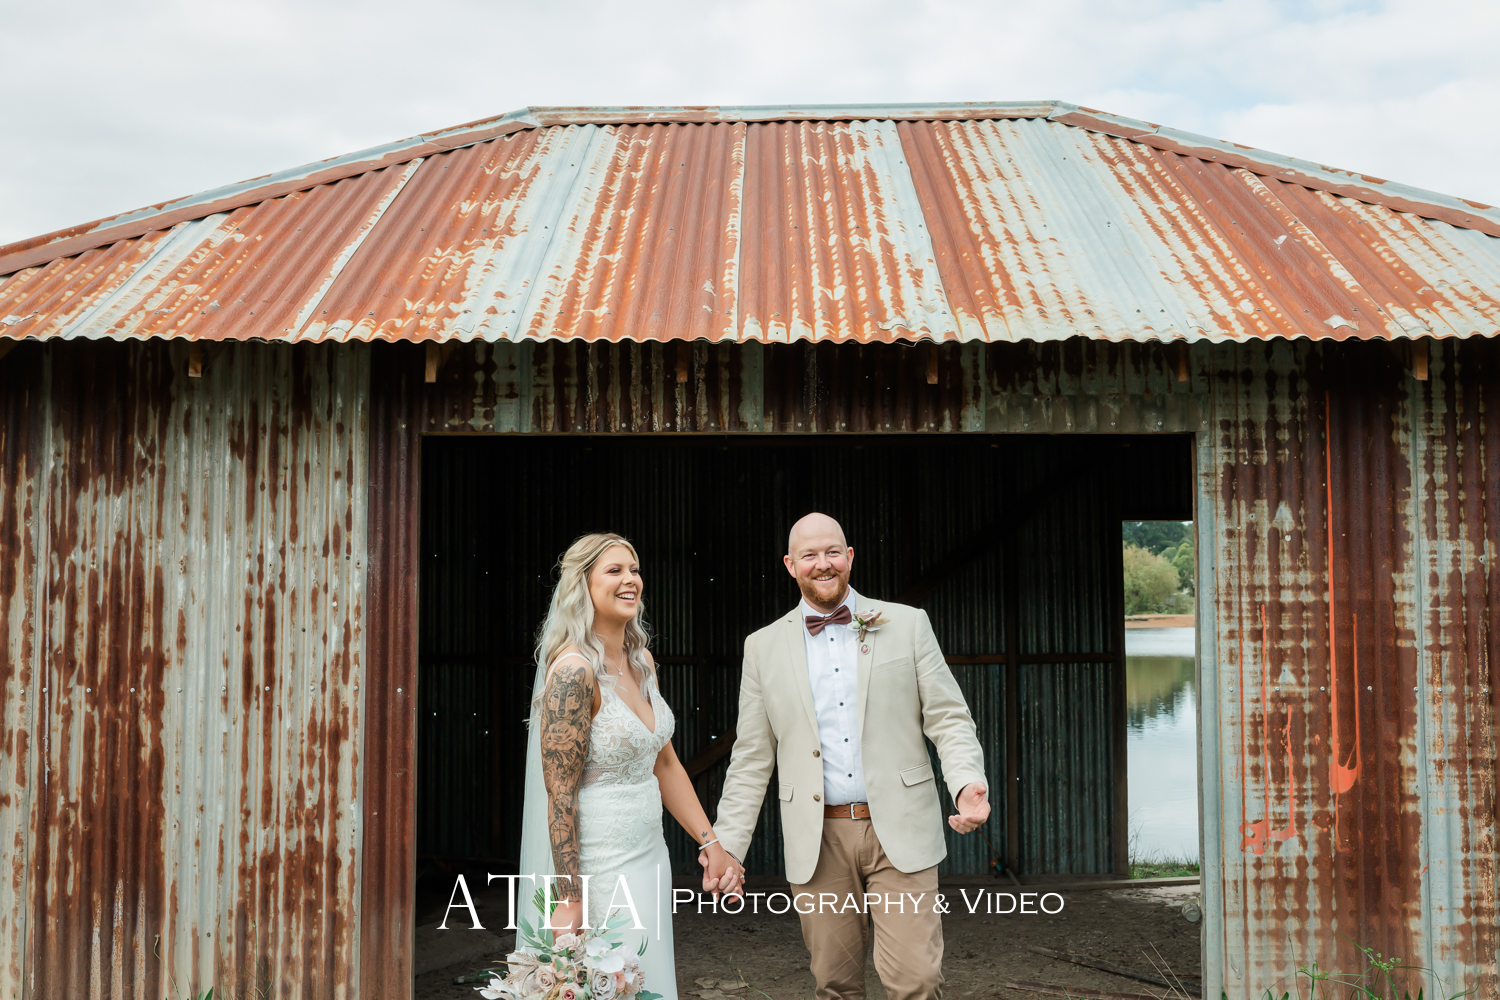 , Chelsea and Marshall&#8217;s wedding photography at Big Fella Cherries captured by ATEIA Photography &#038; Video